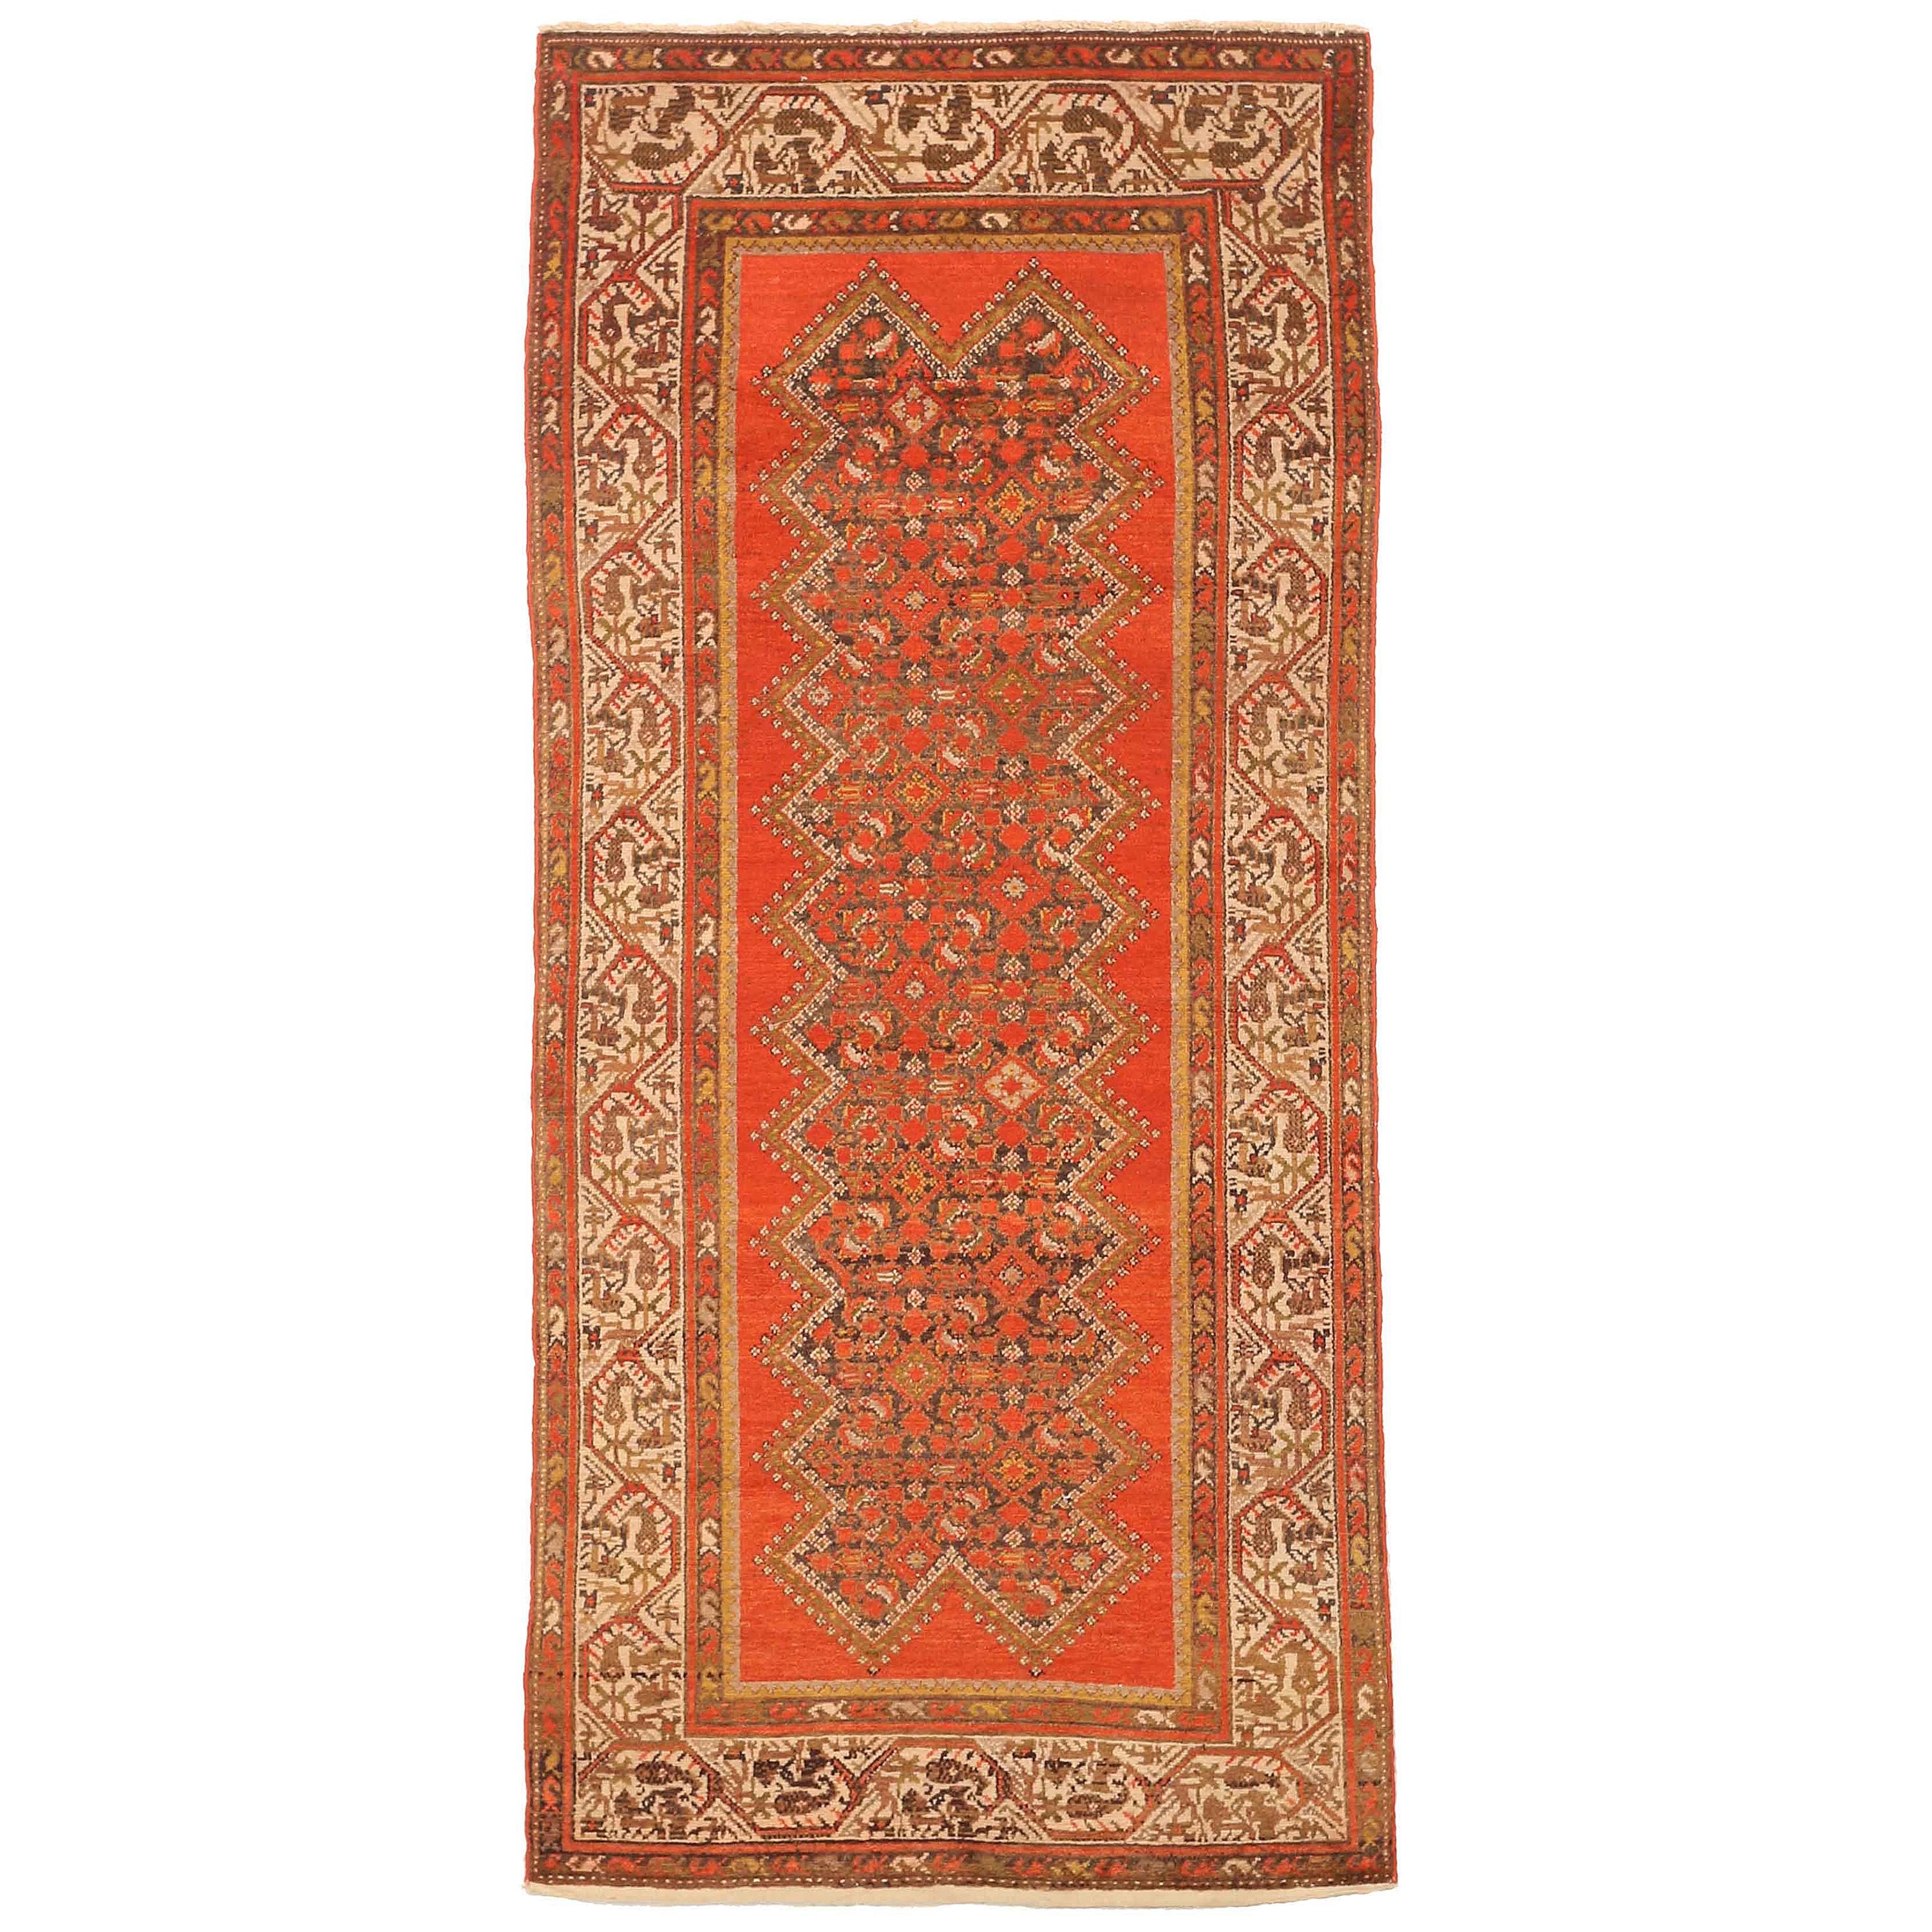 Antique Persian Rug Malayer Style with Enchanting Geometric Details, circa 1930s